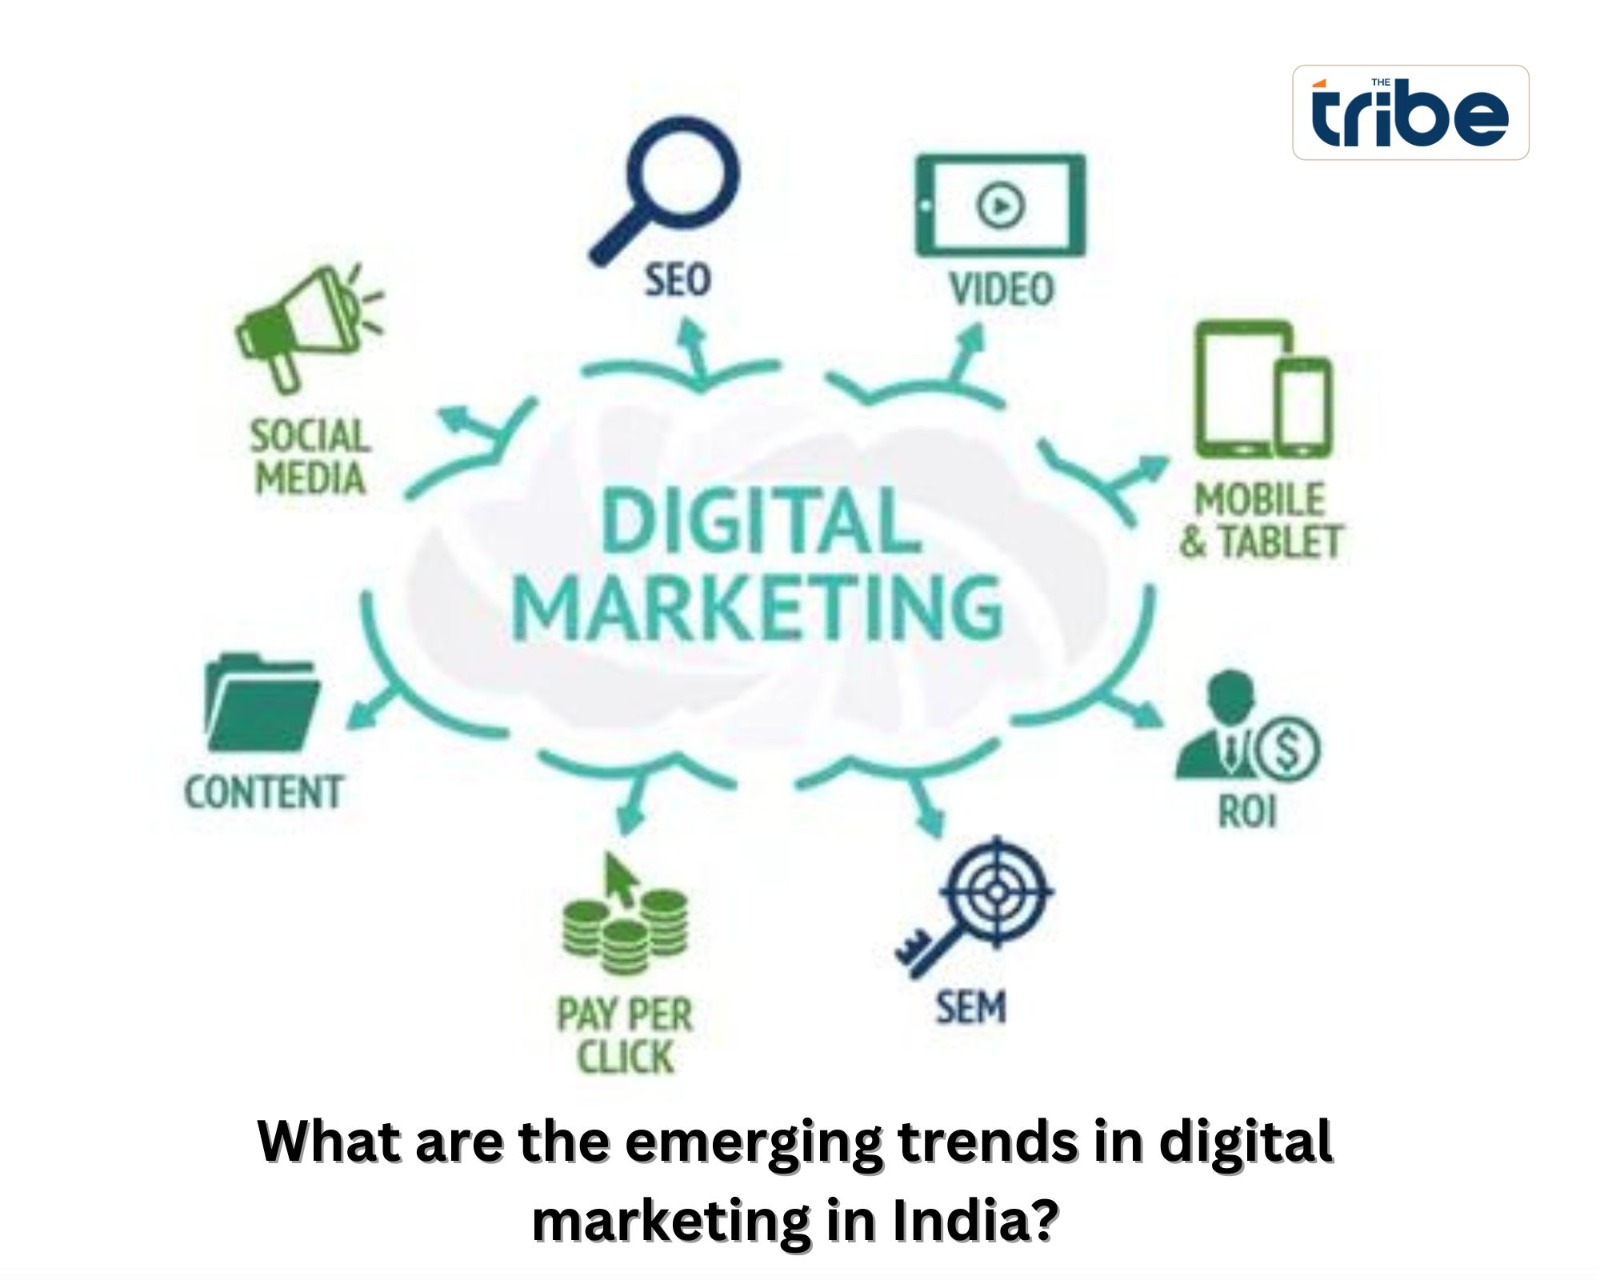 What are the emerging trends in digital marketing in India?